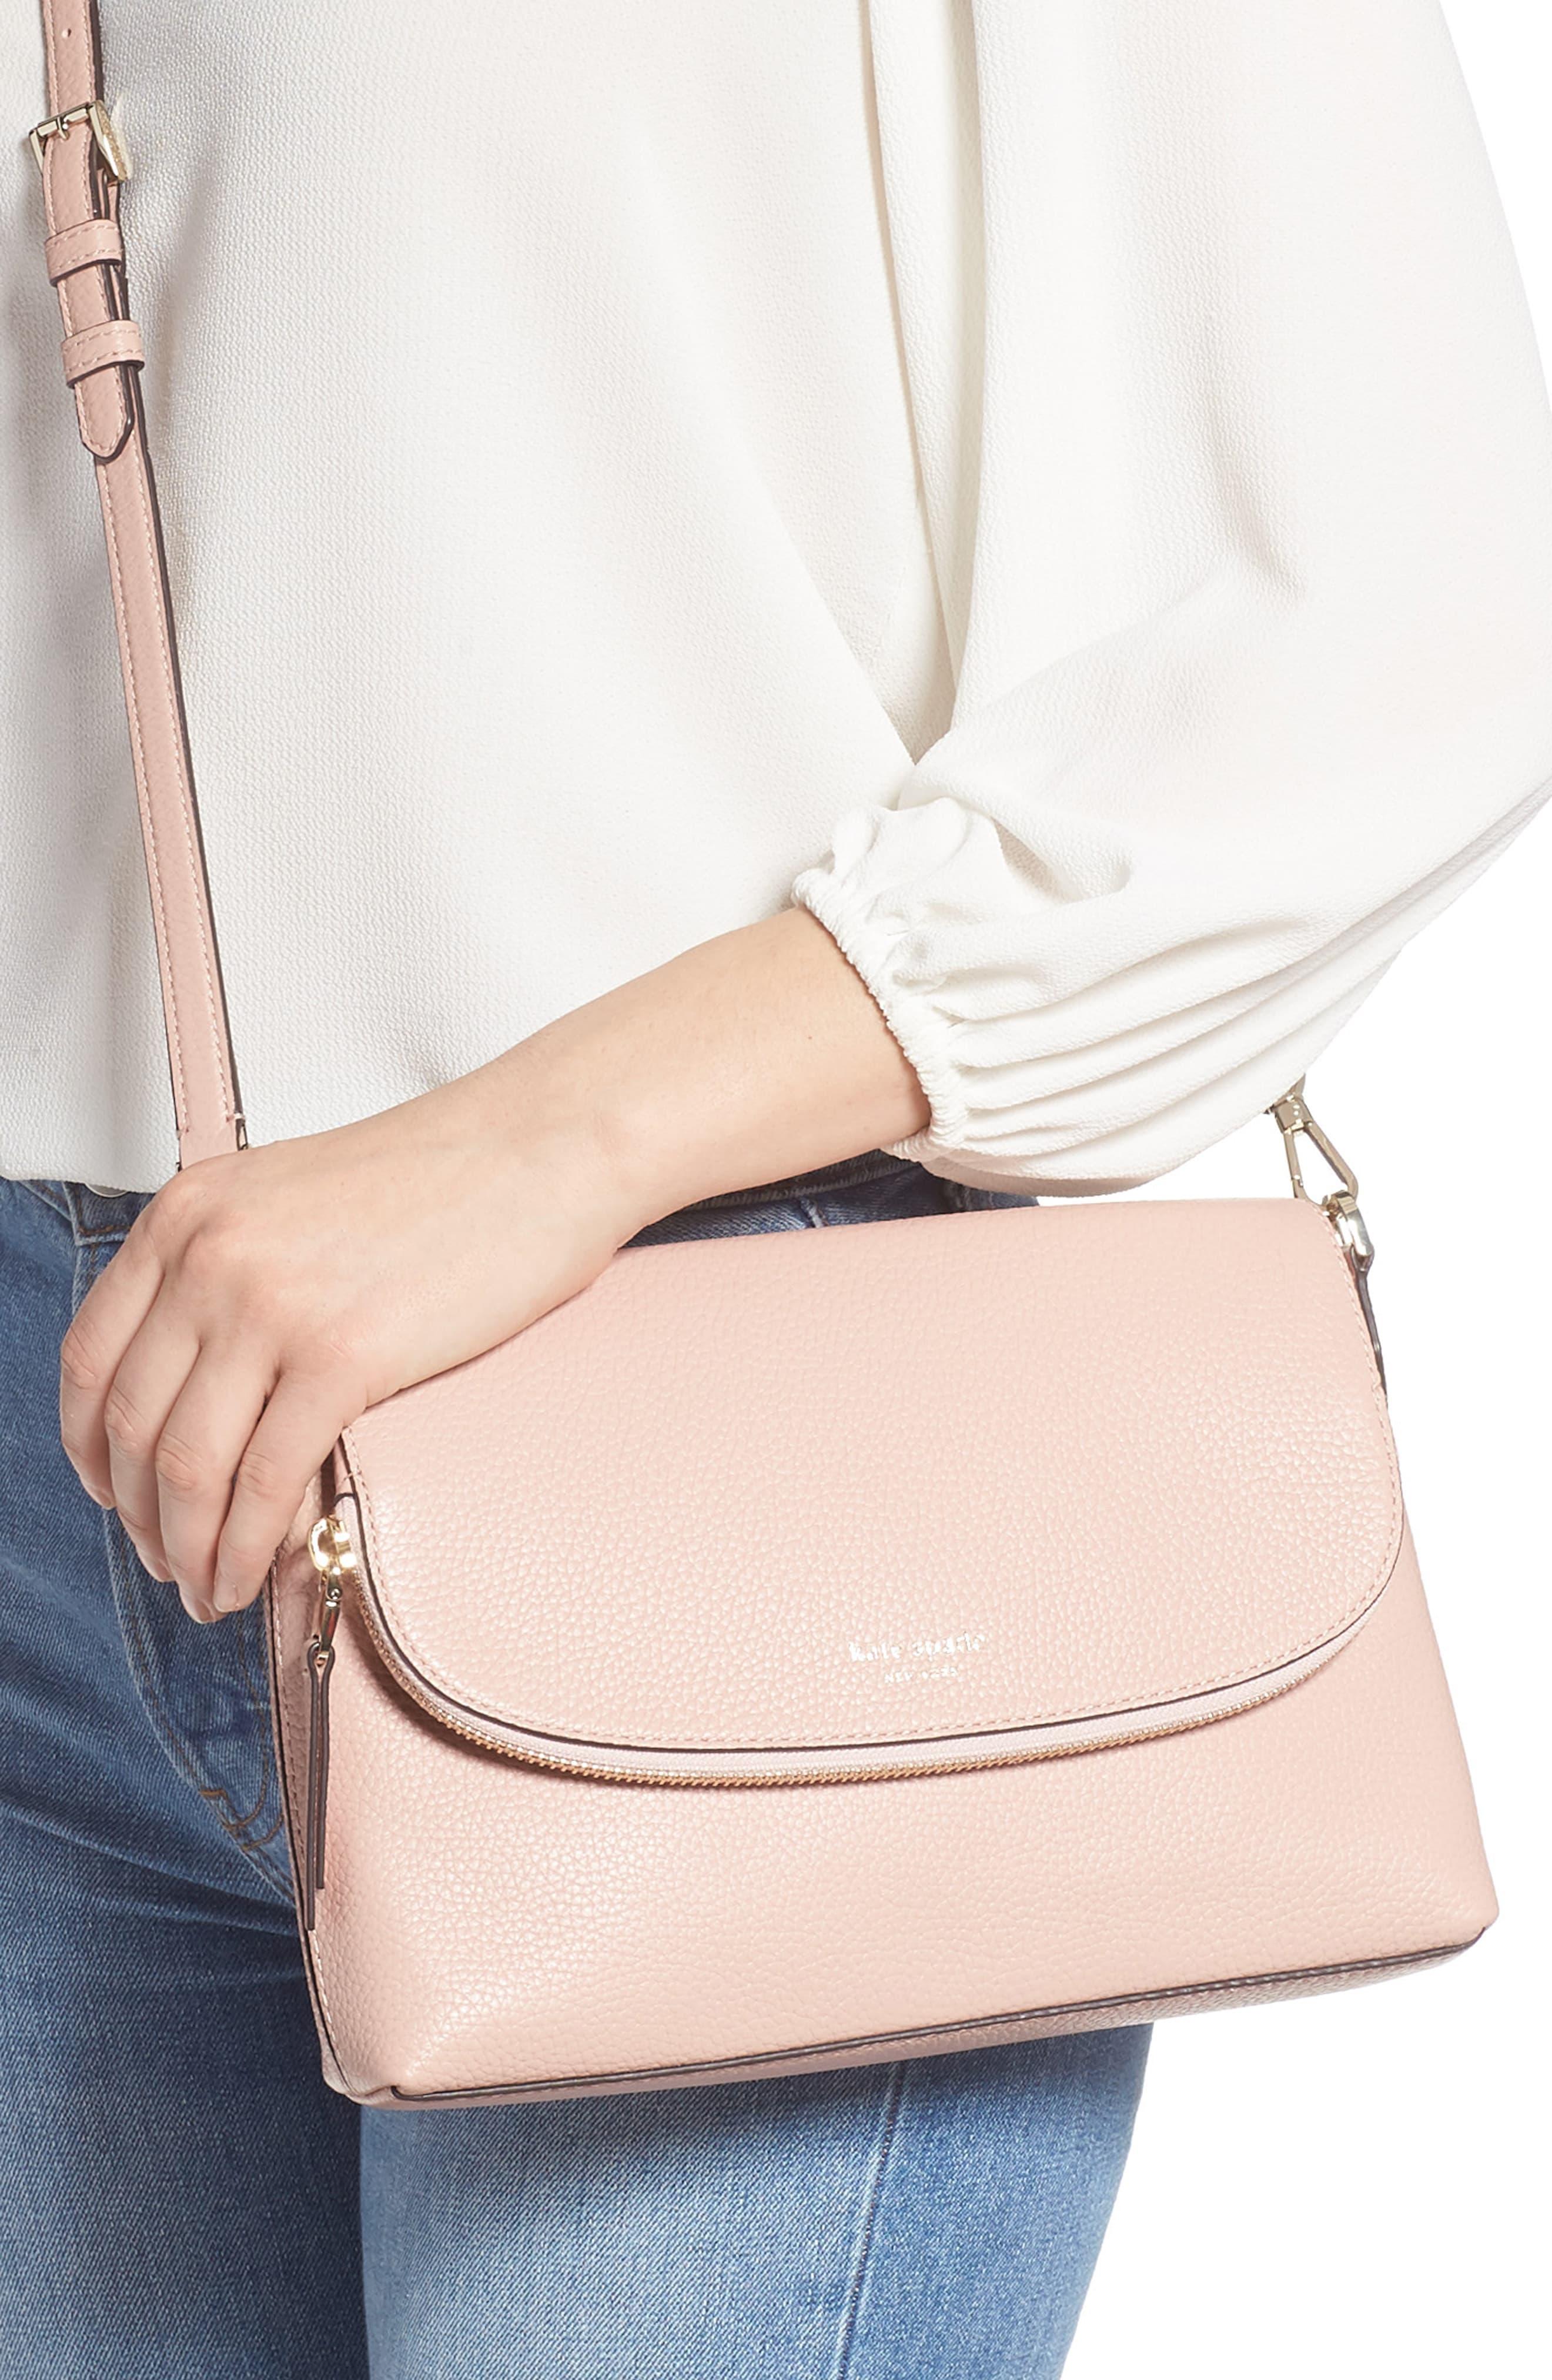 Kate Spade Large Polly Leather Crossbody Bag in Pink - Lyst